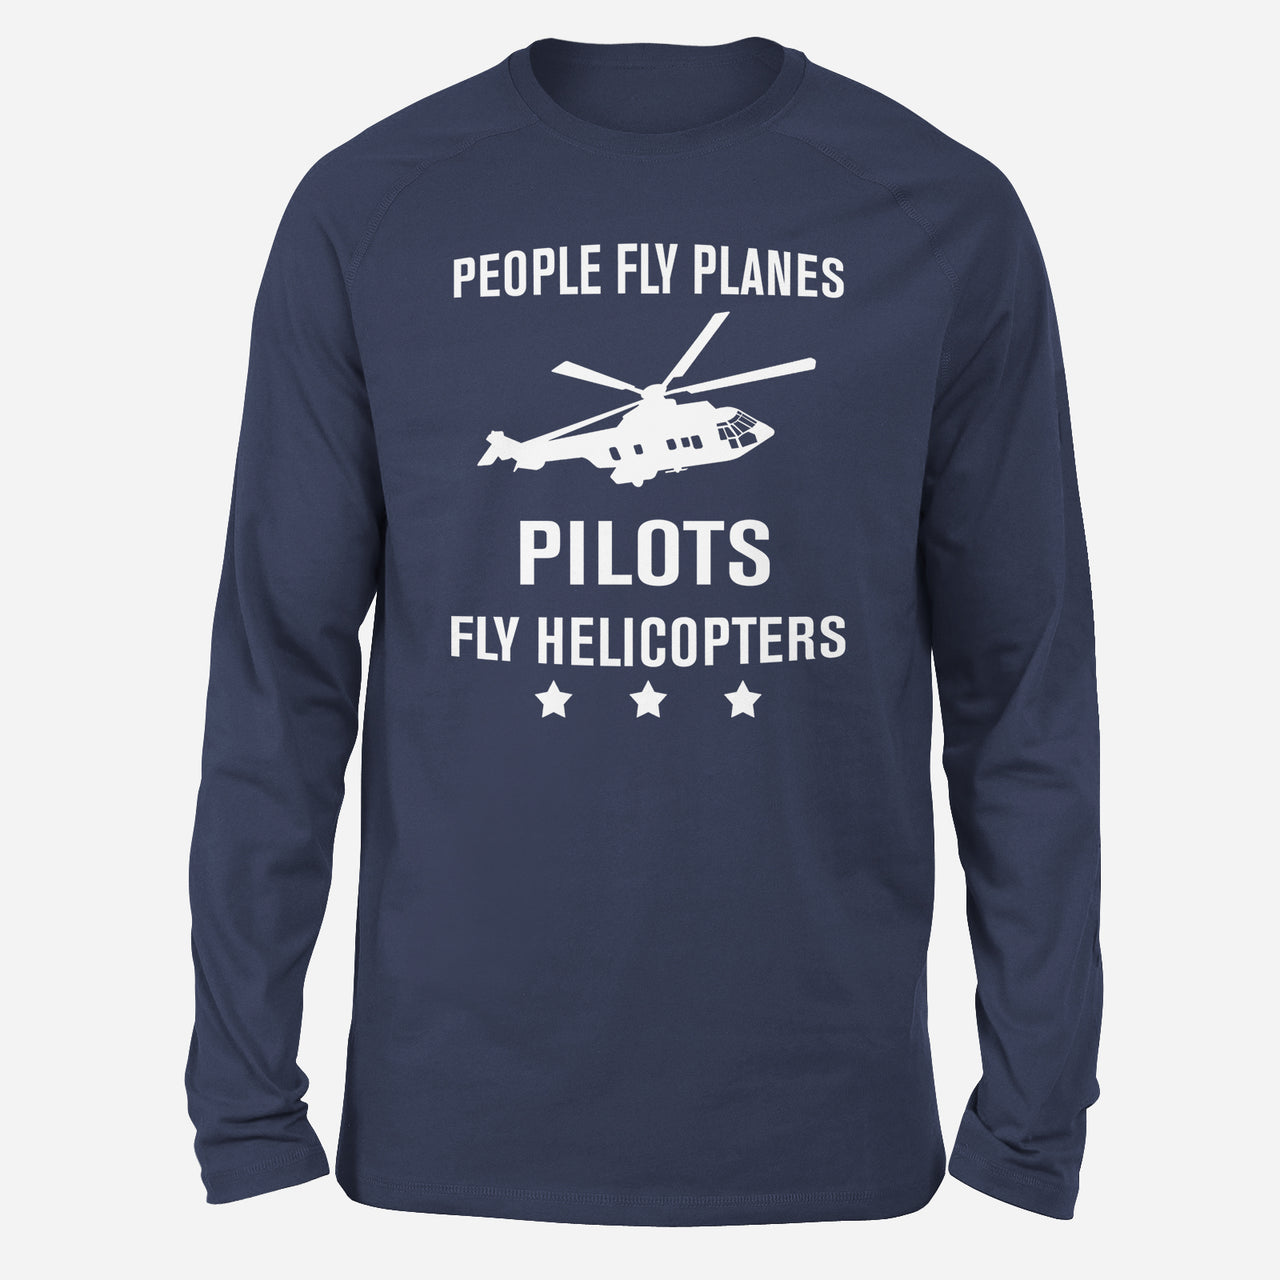 People Fly Planes Pilots Fly Helicopters Designed Long-Sleeve T-Shirts